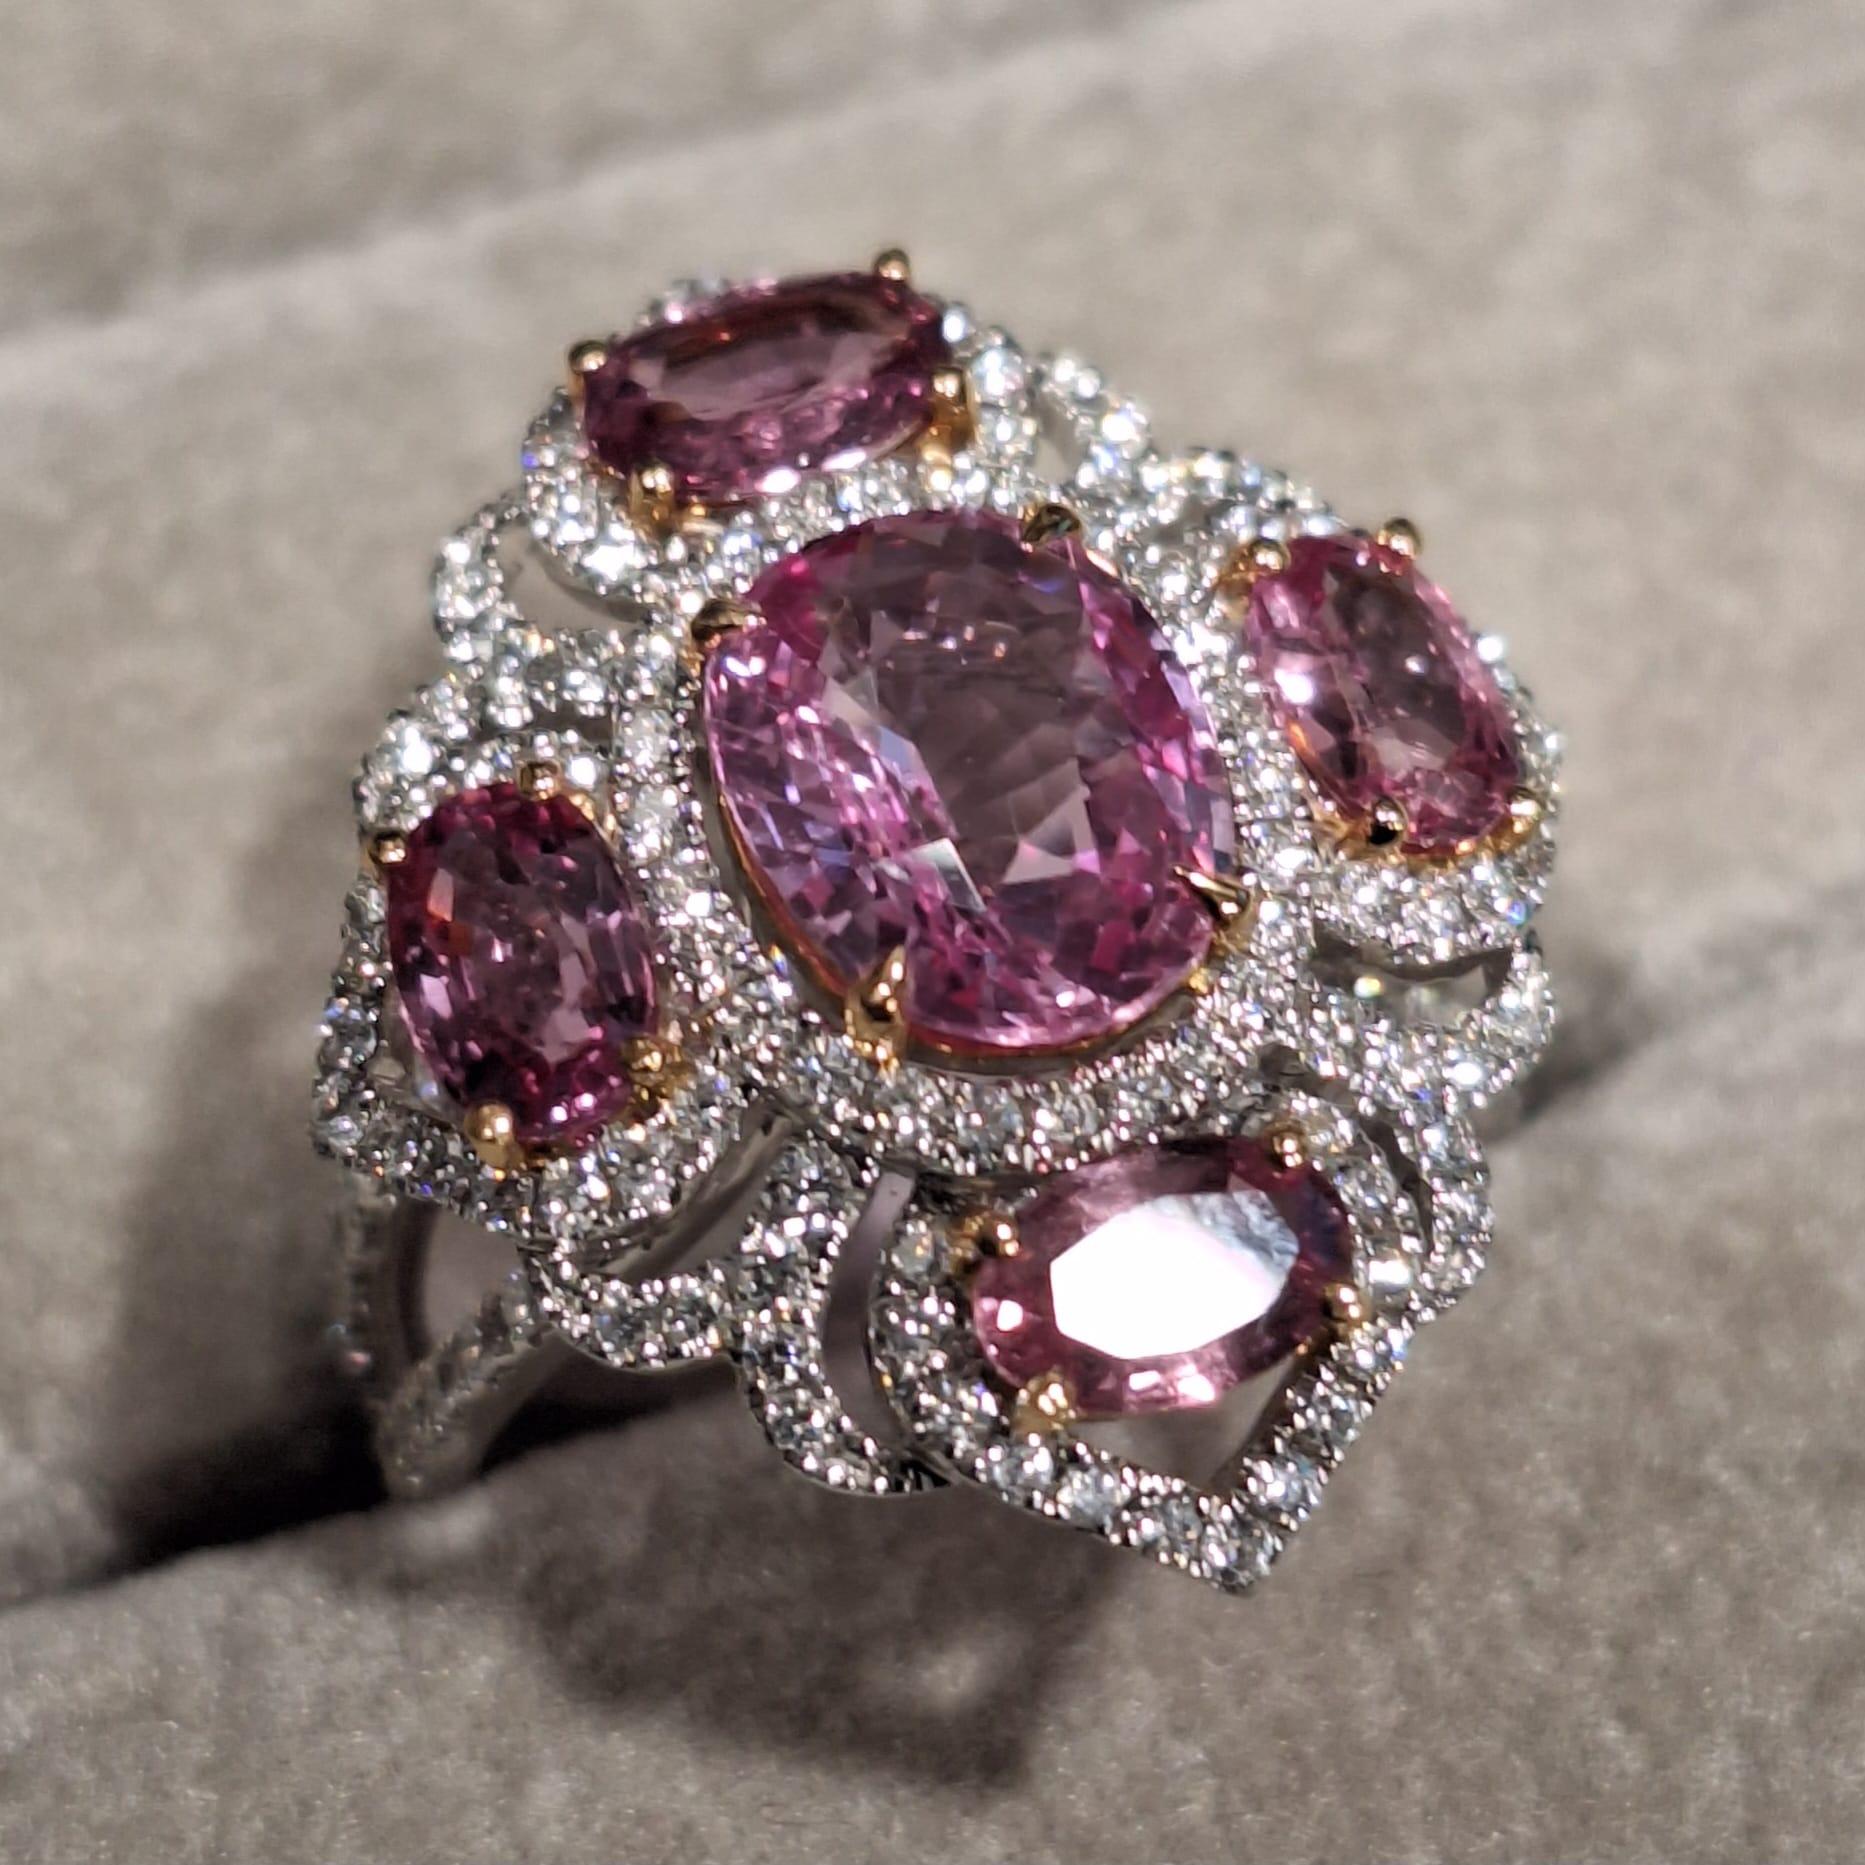 18K White Gold Diamond Ring with Pink Sapphire

Pink sapphires symbolize good fortune, power through hardships, intense love and compassion, and subtle elegance.

Diamonds symbolise clarity and purity, also represent innocence, strength, and true